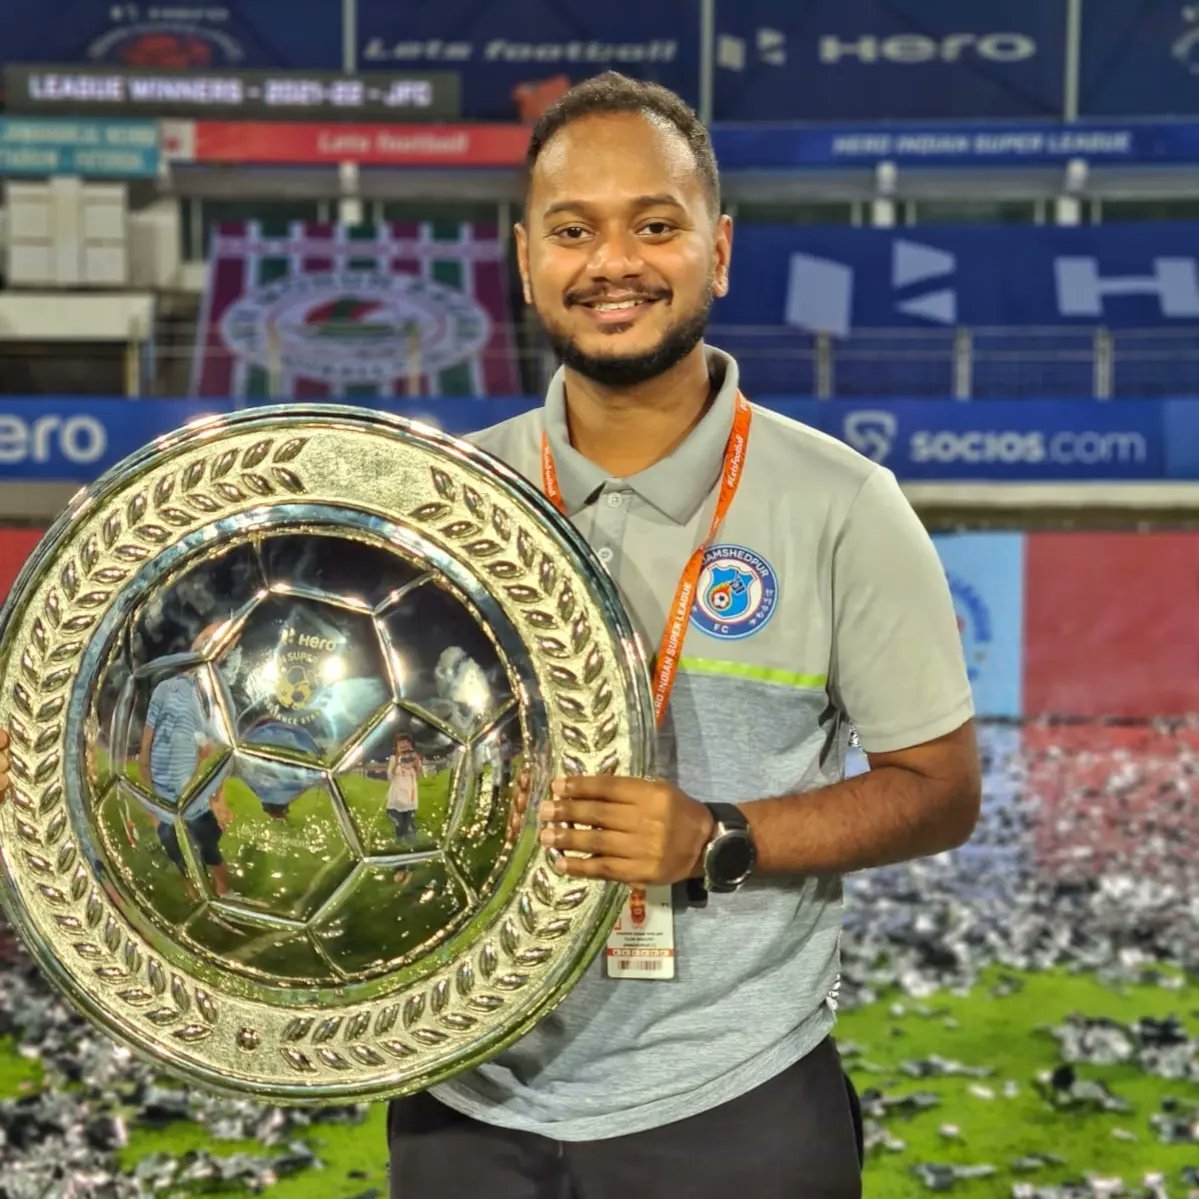 Farewell Jamshedpur! ⚽❤️
The best 7 years of my life I spent in this amazing football club and this beautiful city. From day one, I wanted to win a silverware for this city and I can proudly say that I was part of the team that achieved this dream.